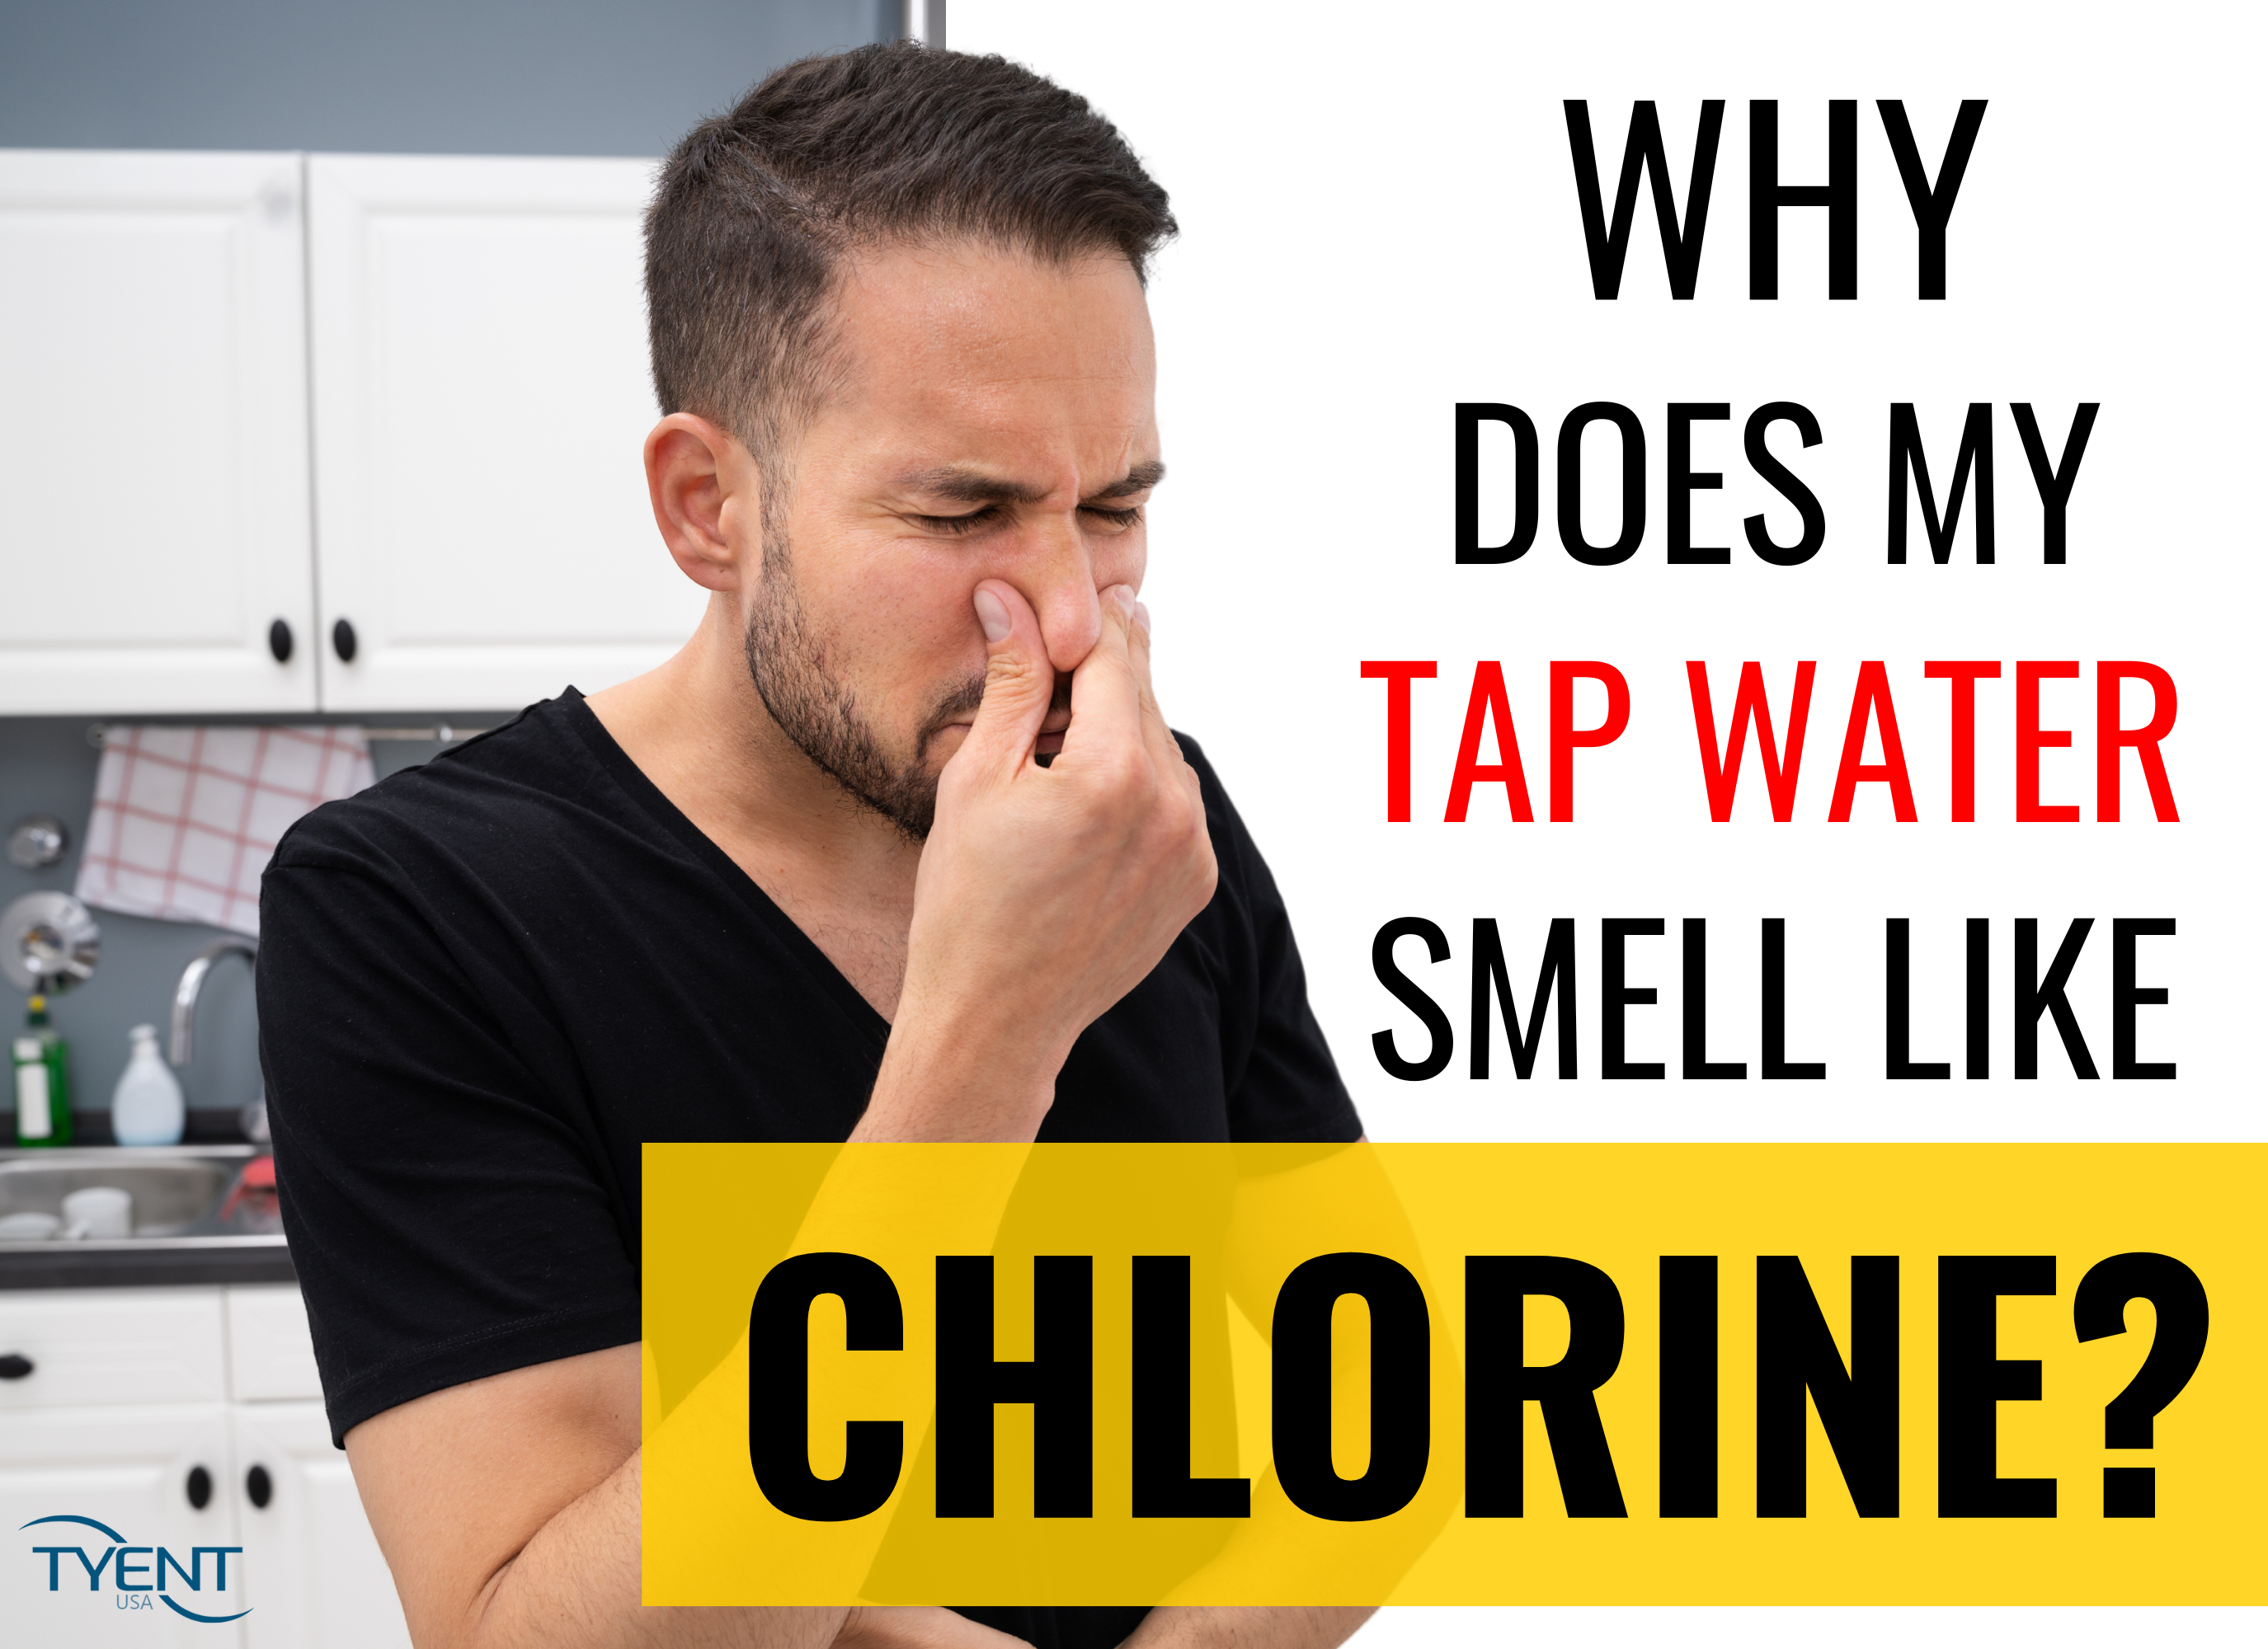 Why does my tap water smell like chlorine